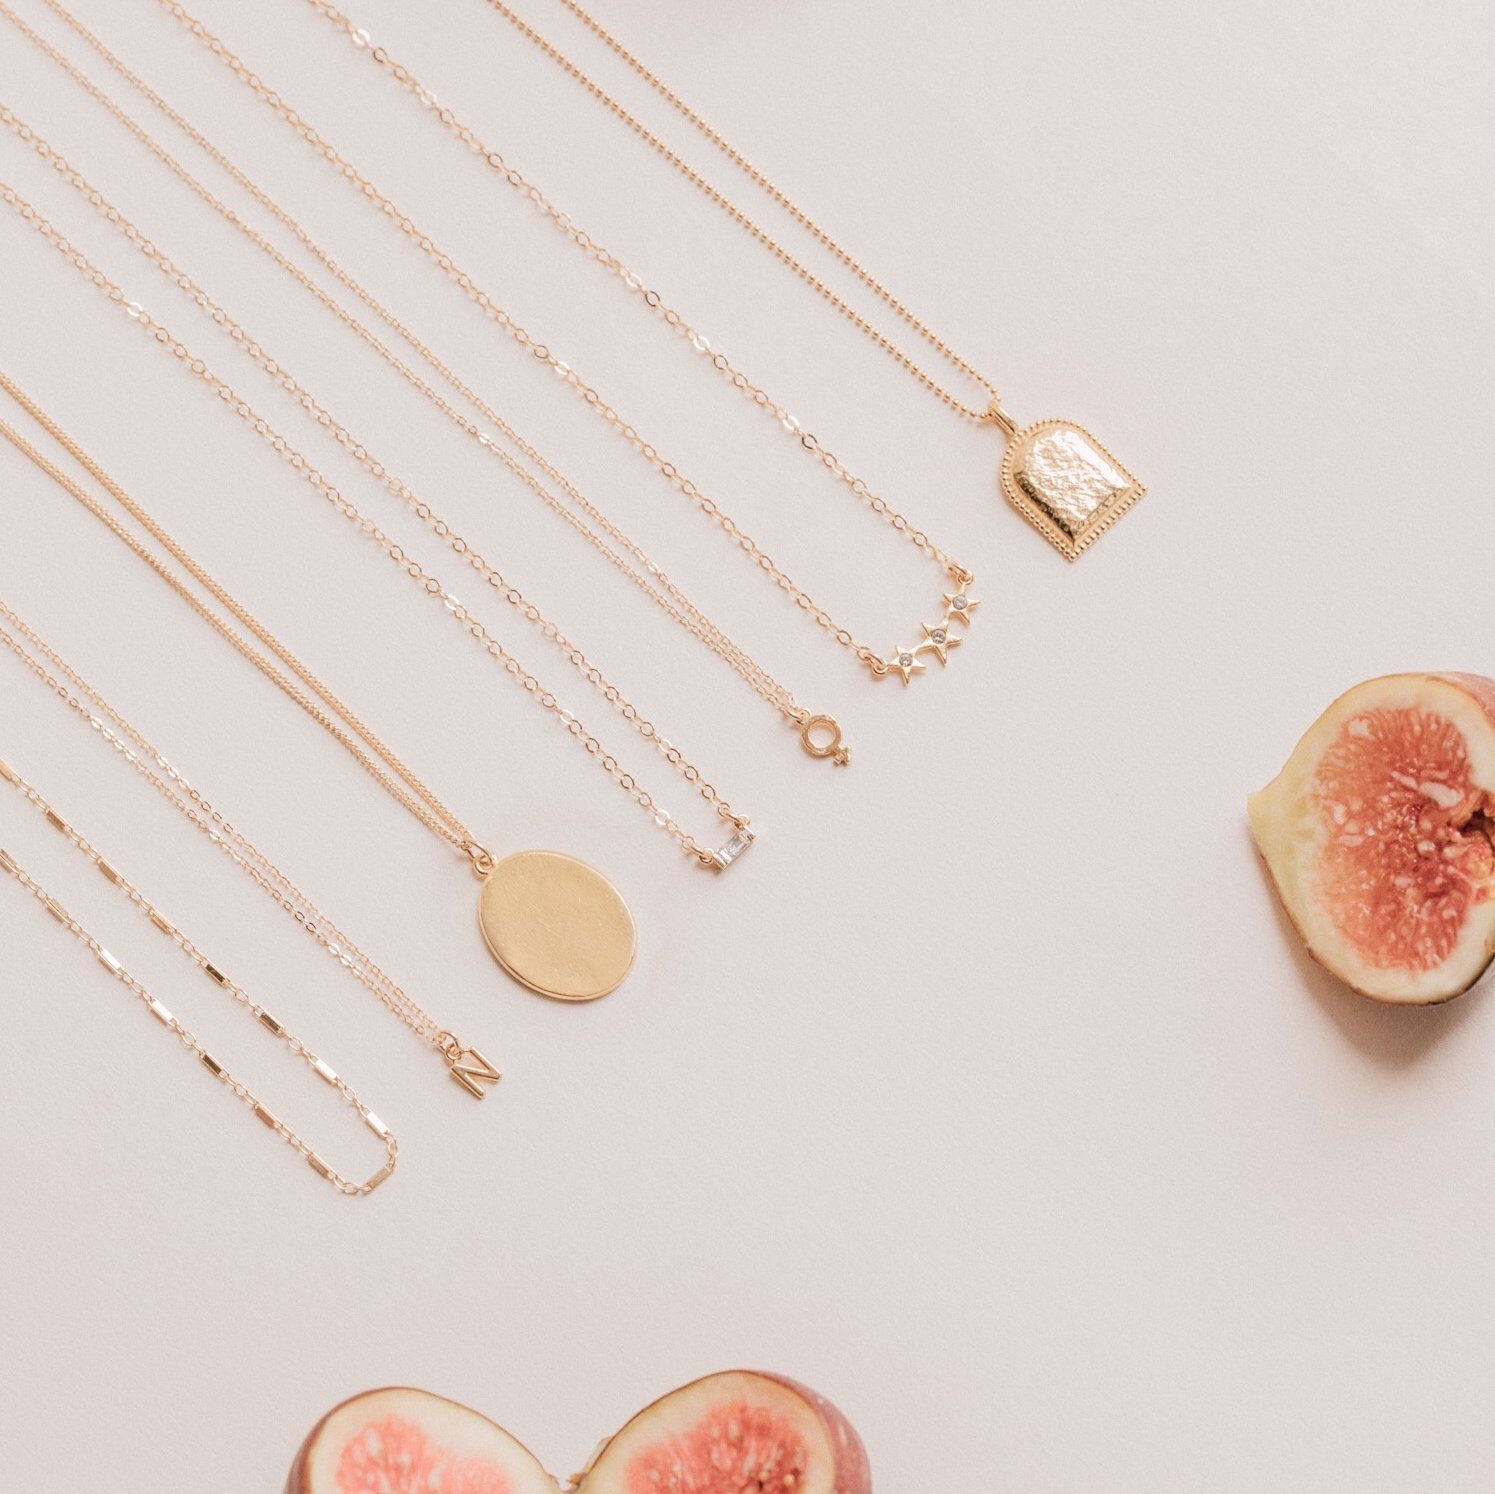 Our Favorite Dainty Necklaces